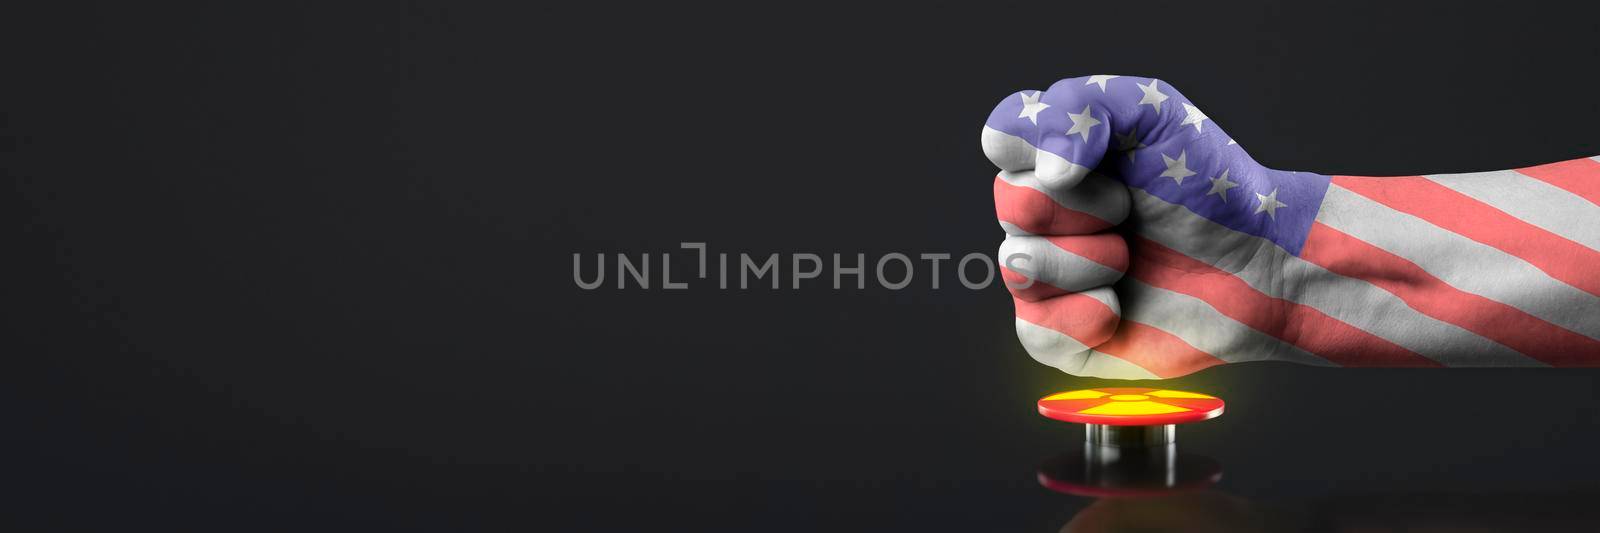 The hand presses the big red button. The concept of the threat of nuclear war. A hand painted in the colors of the American flag presses the button to launch a nuclear bomb